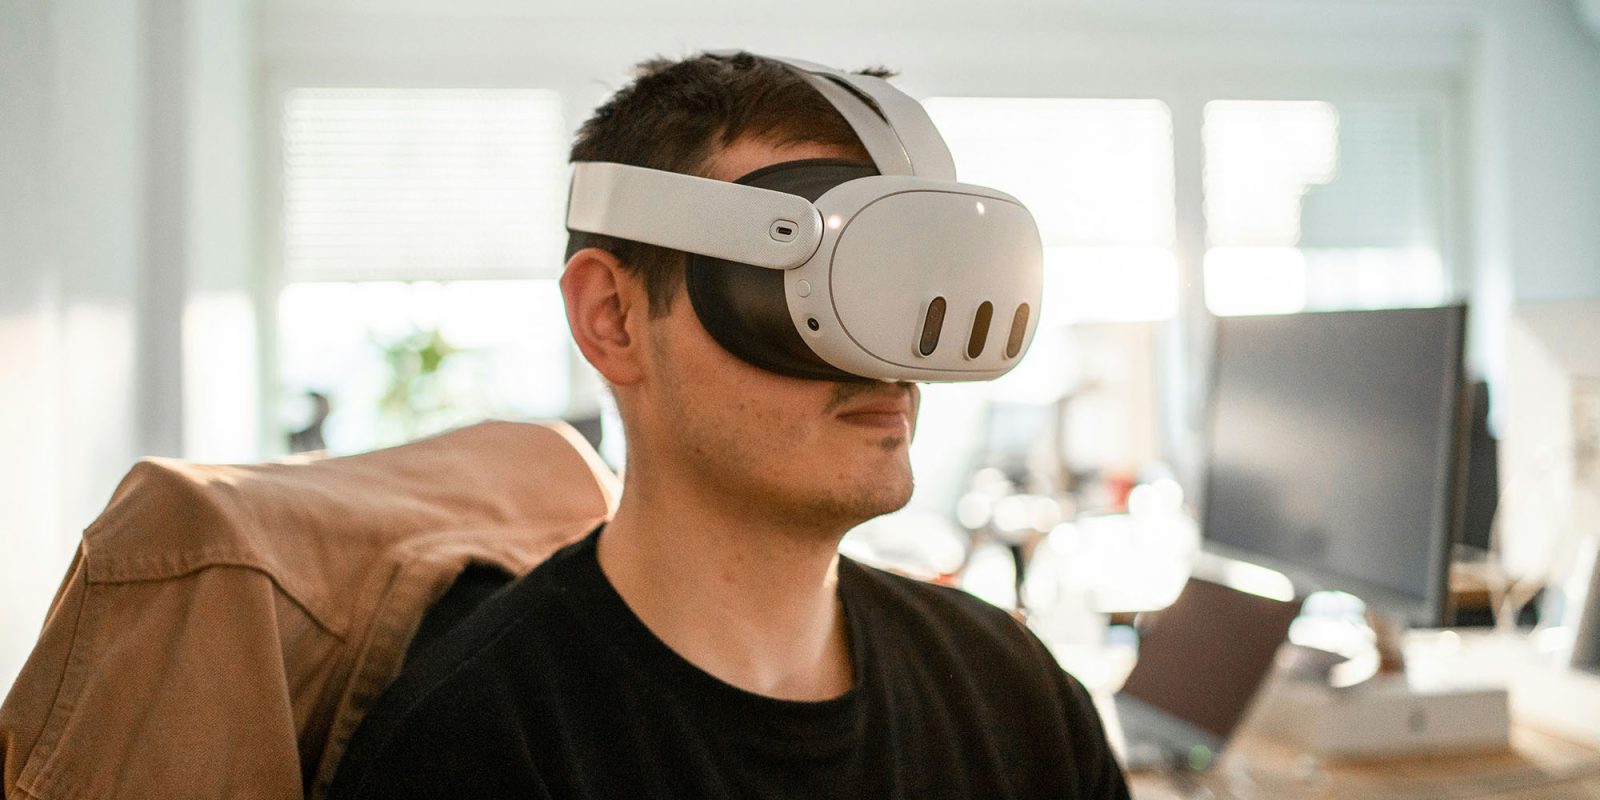 Meta Quest headsets (shown) testing Vision Pro-style freeform window placement